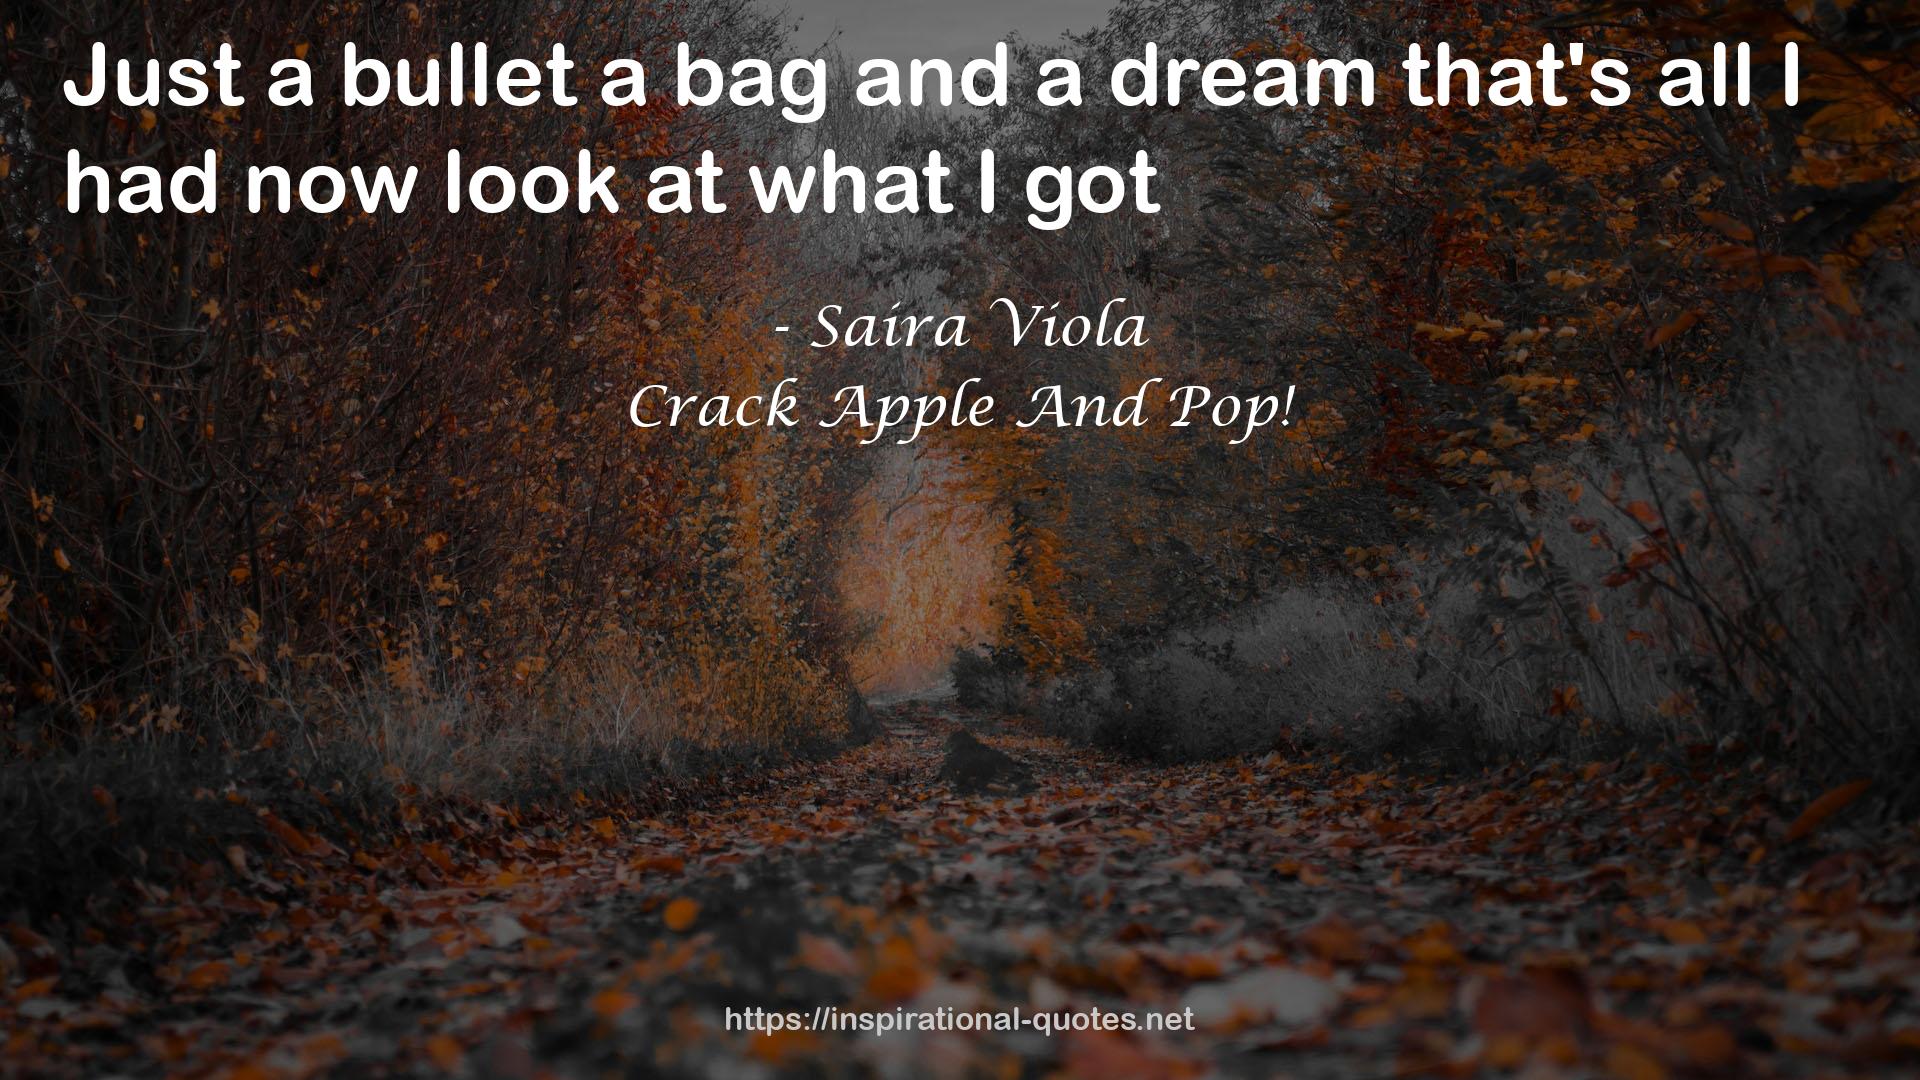 Crack Apple And Pop! QUOTES